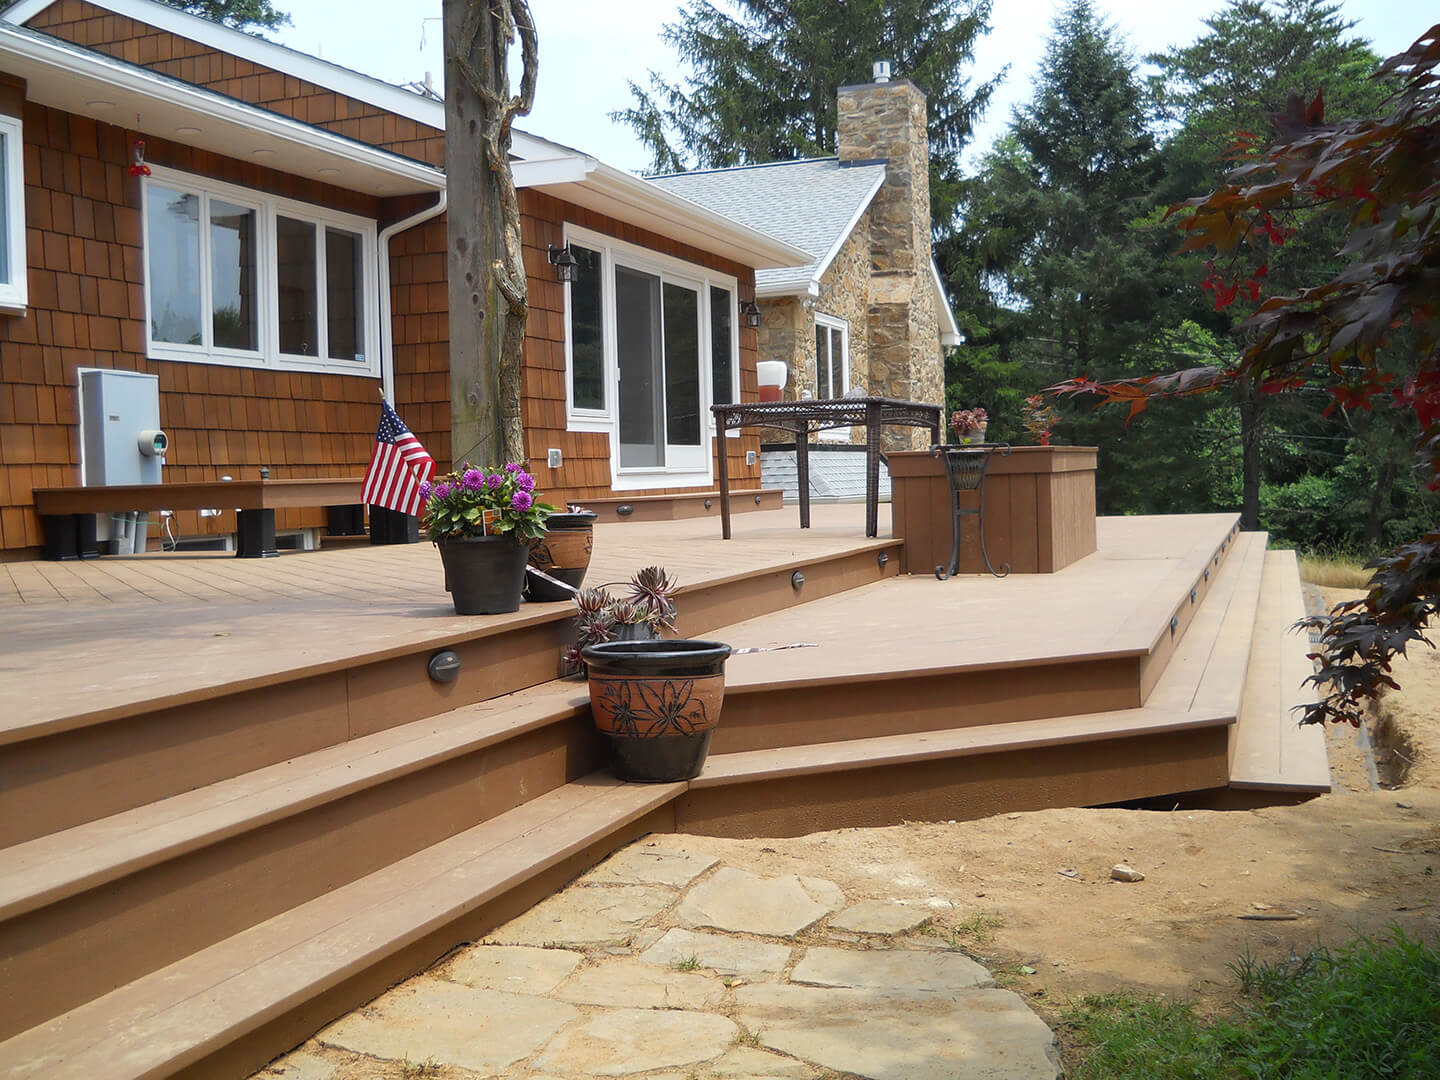 side view of tan azek deck with planters, lights, and a fire pit